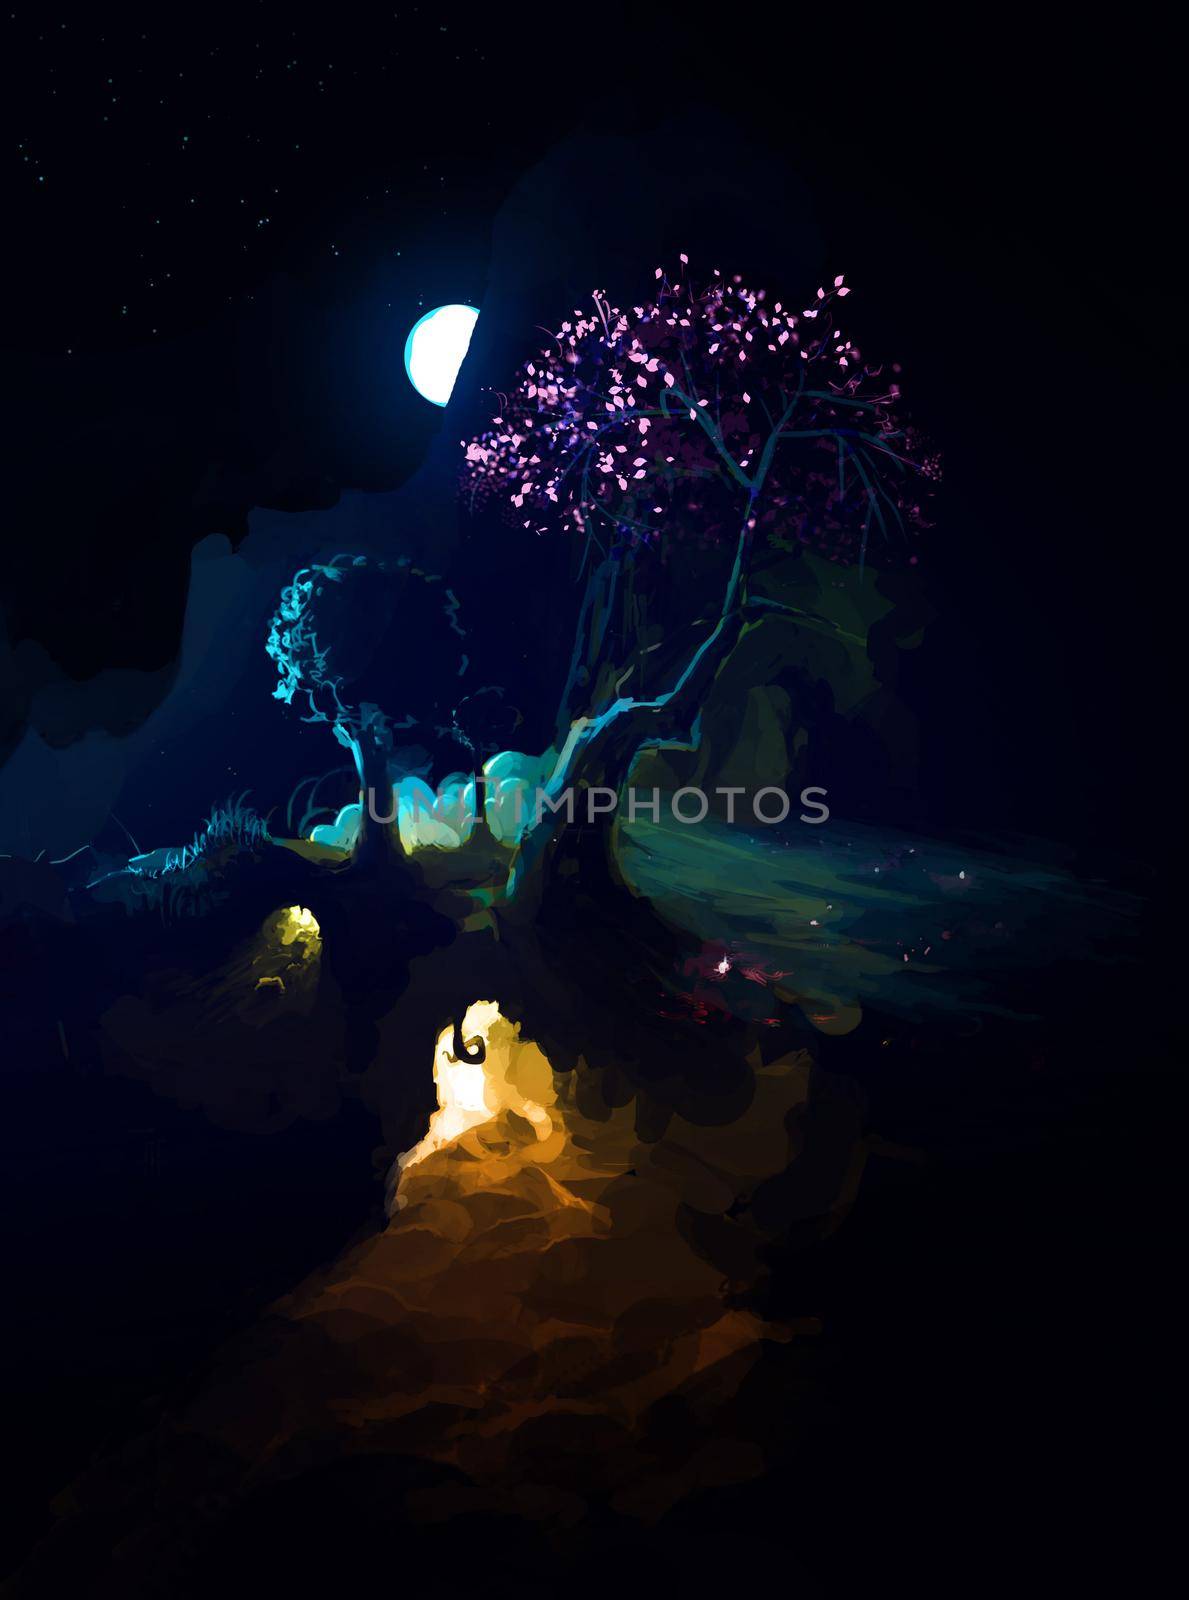 Moon in night above Night Scenic Landscape with illuminated burrow and mountains. Dark Fantasy Illustration